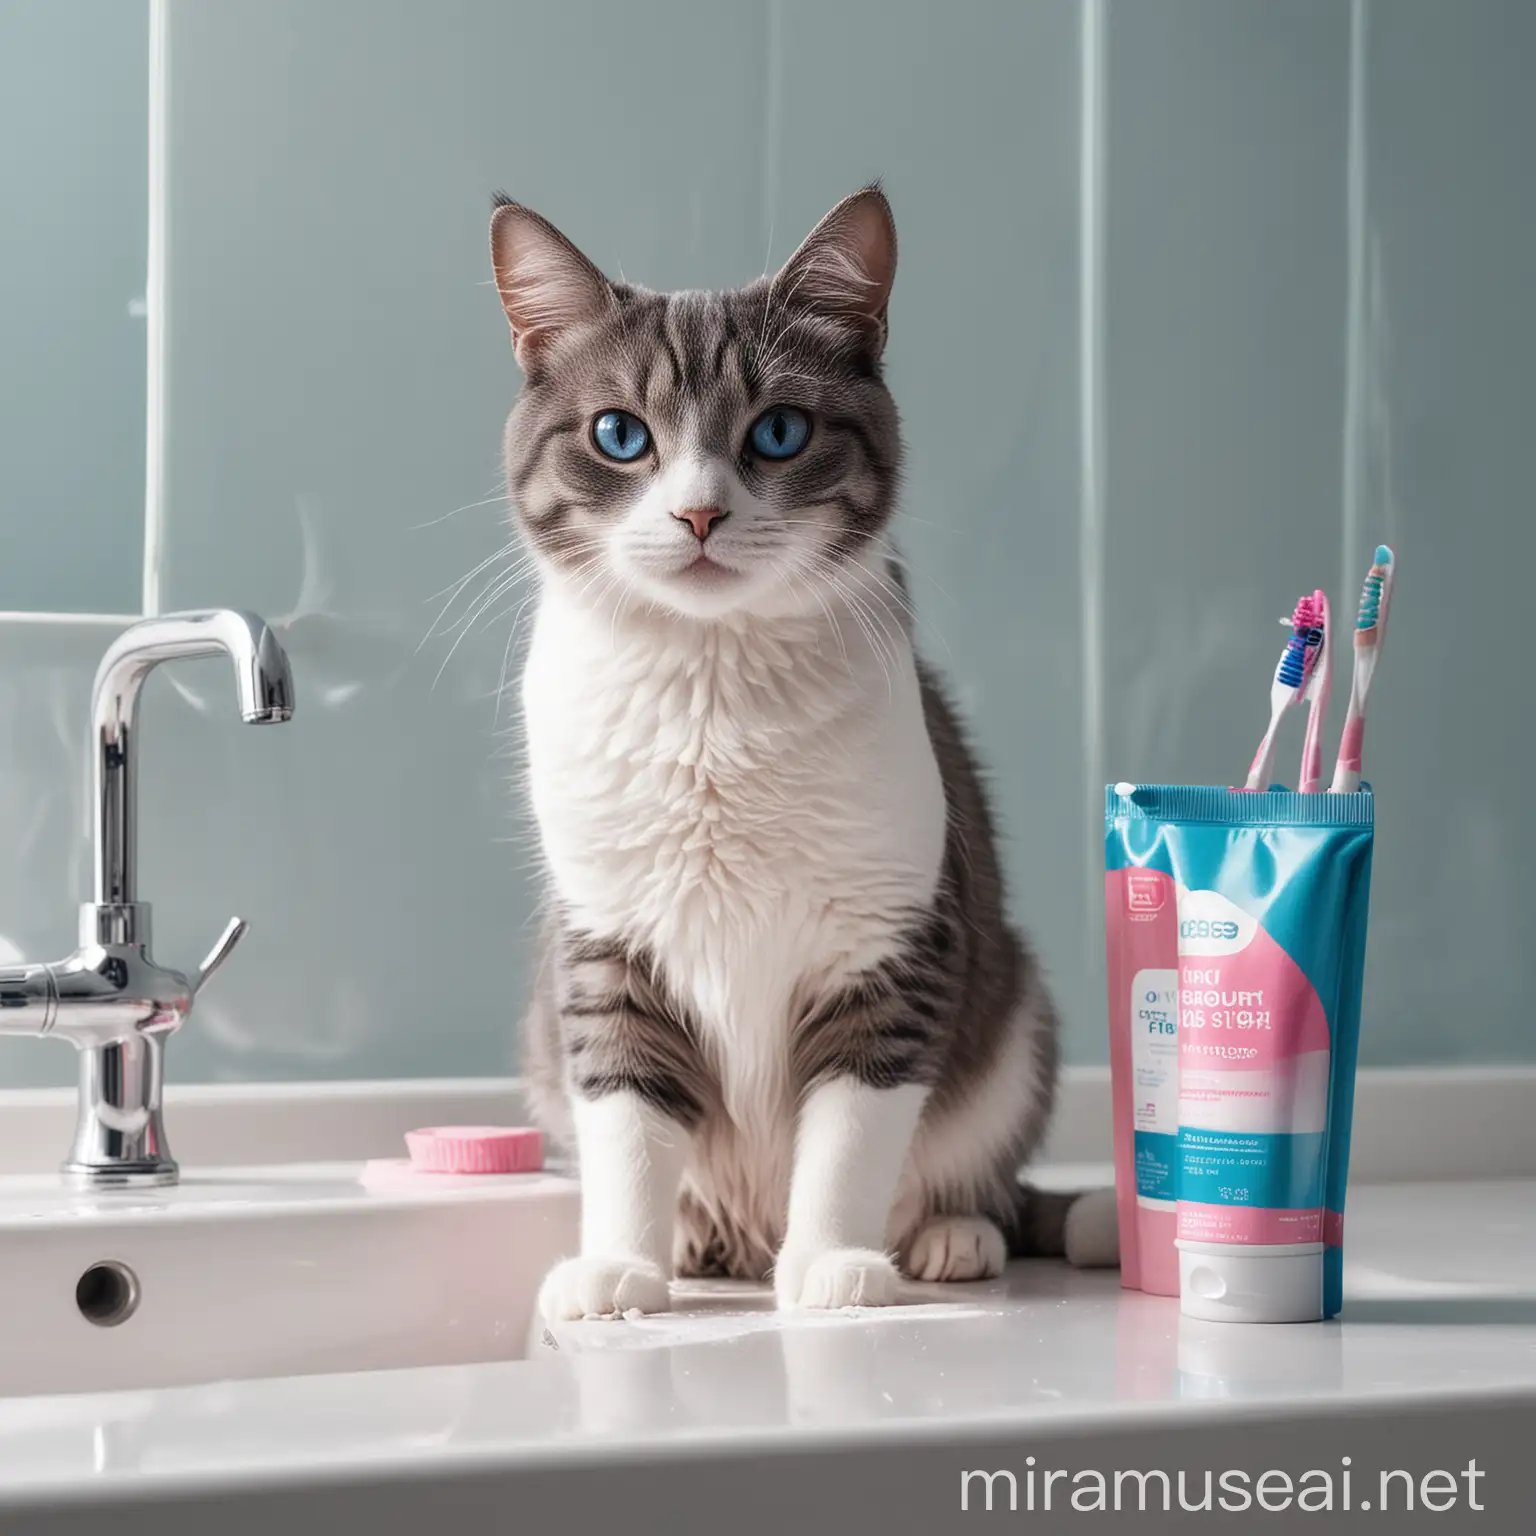 Cat Sitting on Sink with Toothbrushes and Toothpaste in Bright Blue and Pink Tones